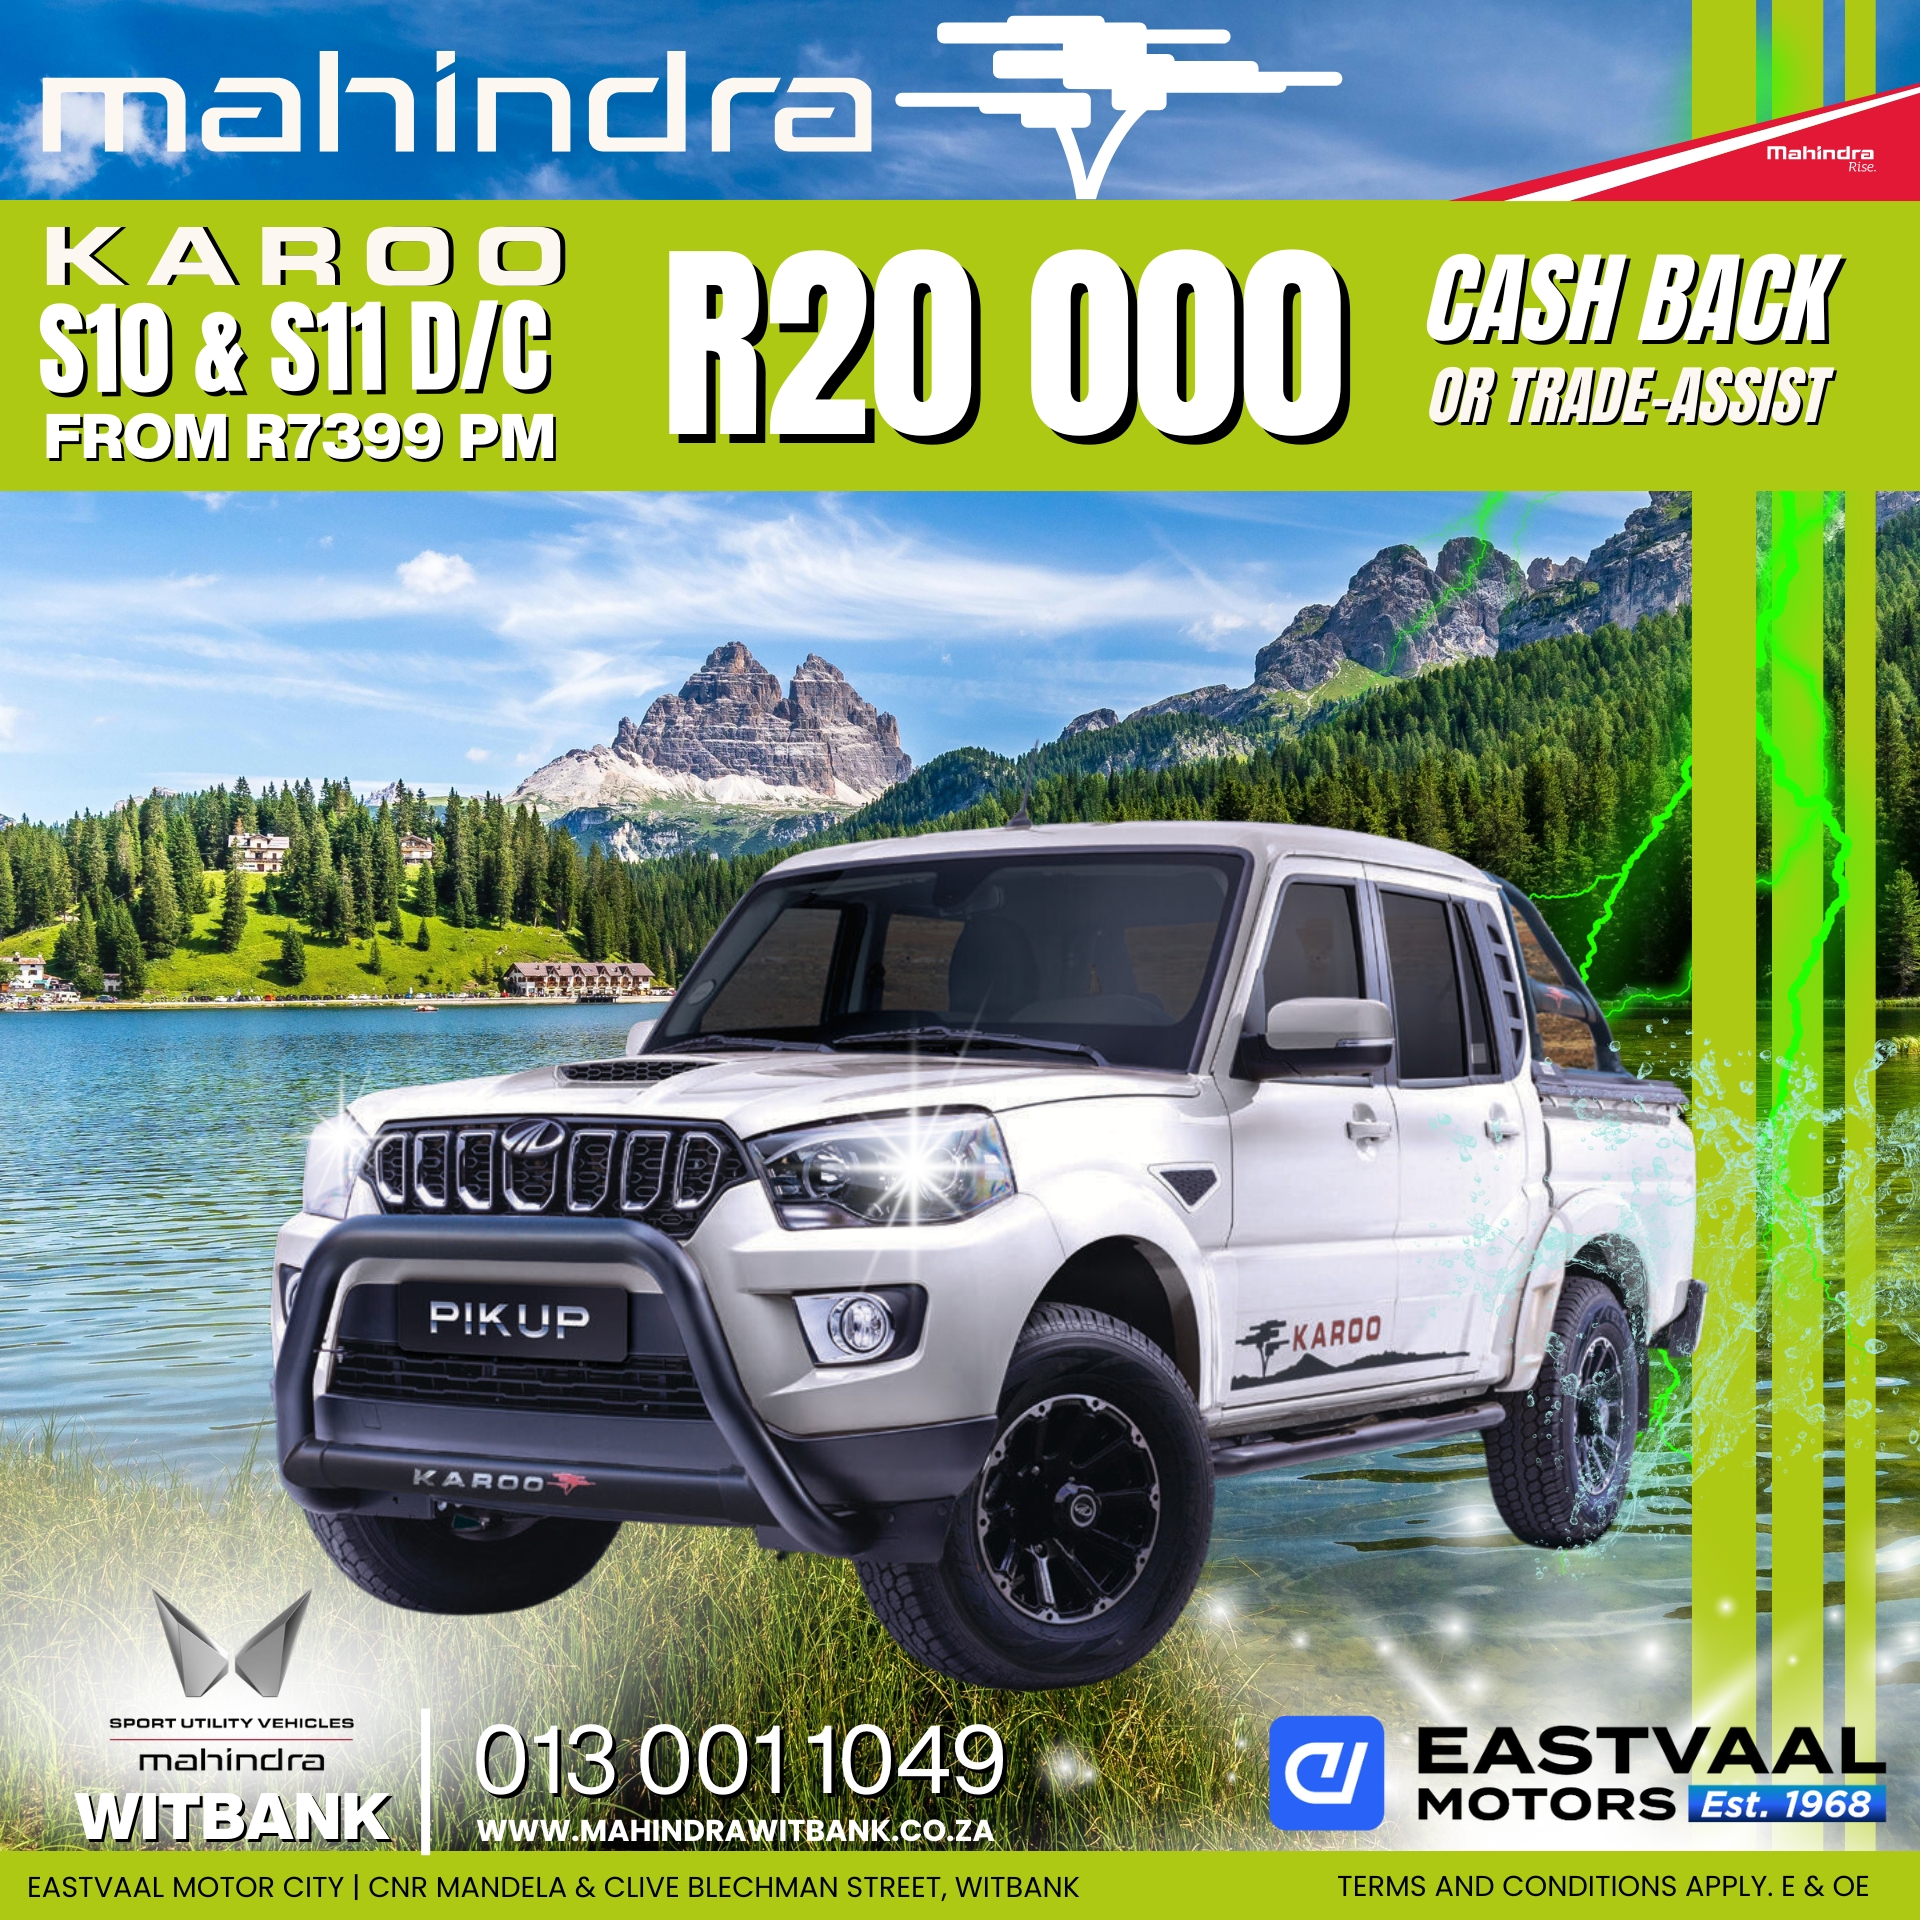 Discover exceptional value and unmatched reliability with Mahindra this July at Eastvaal Motor City. image from 